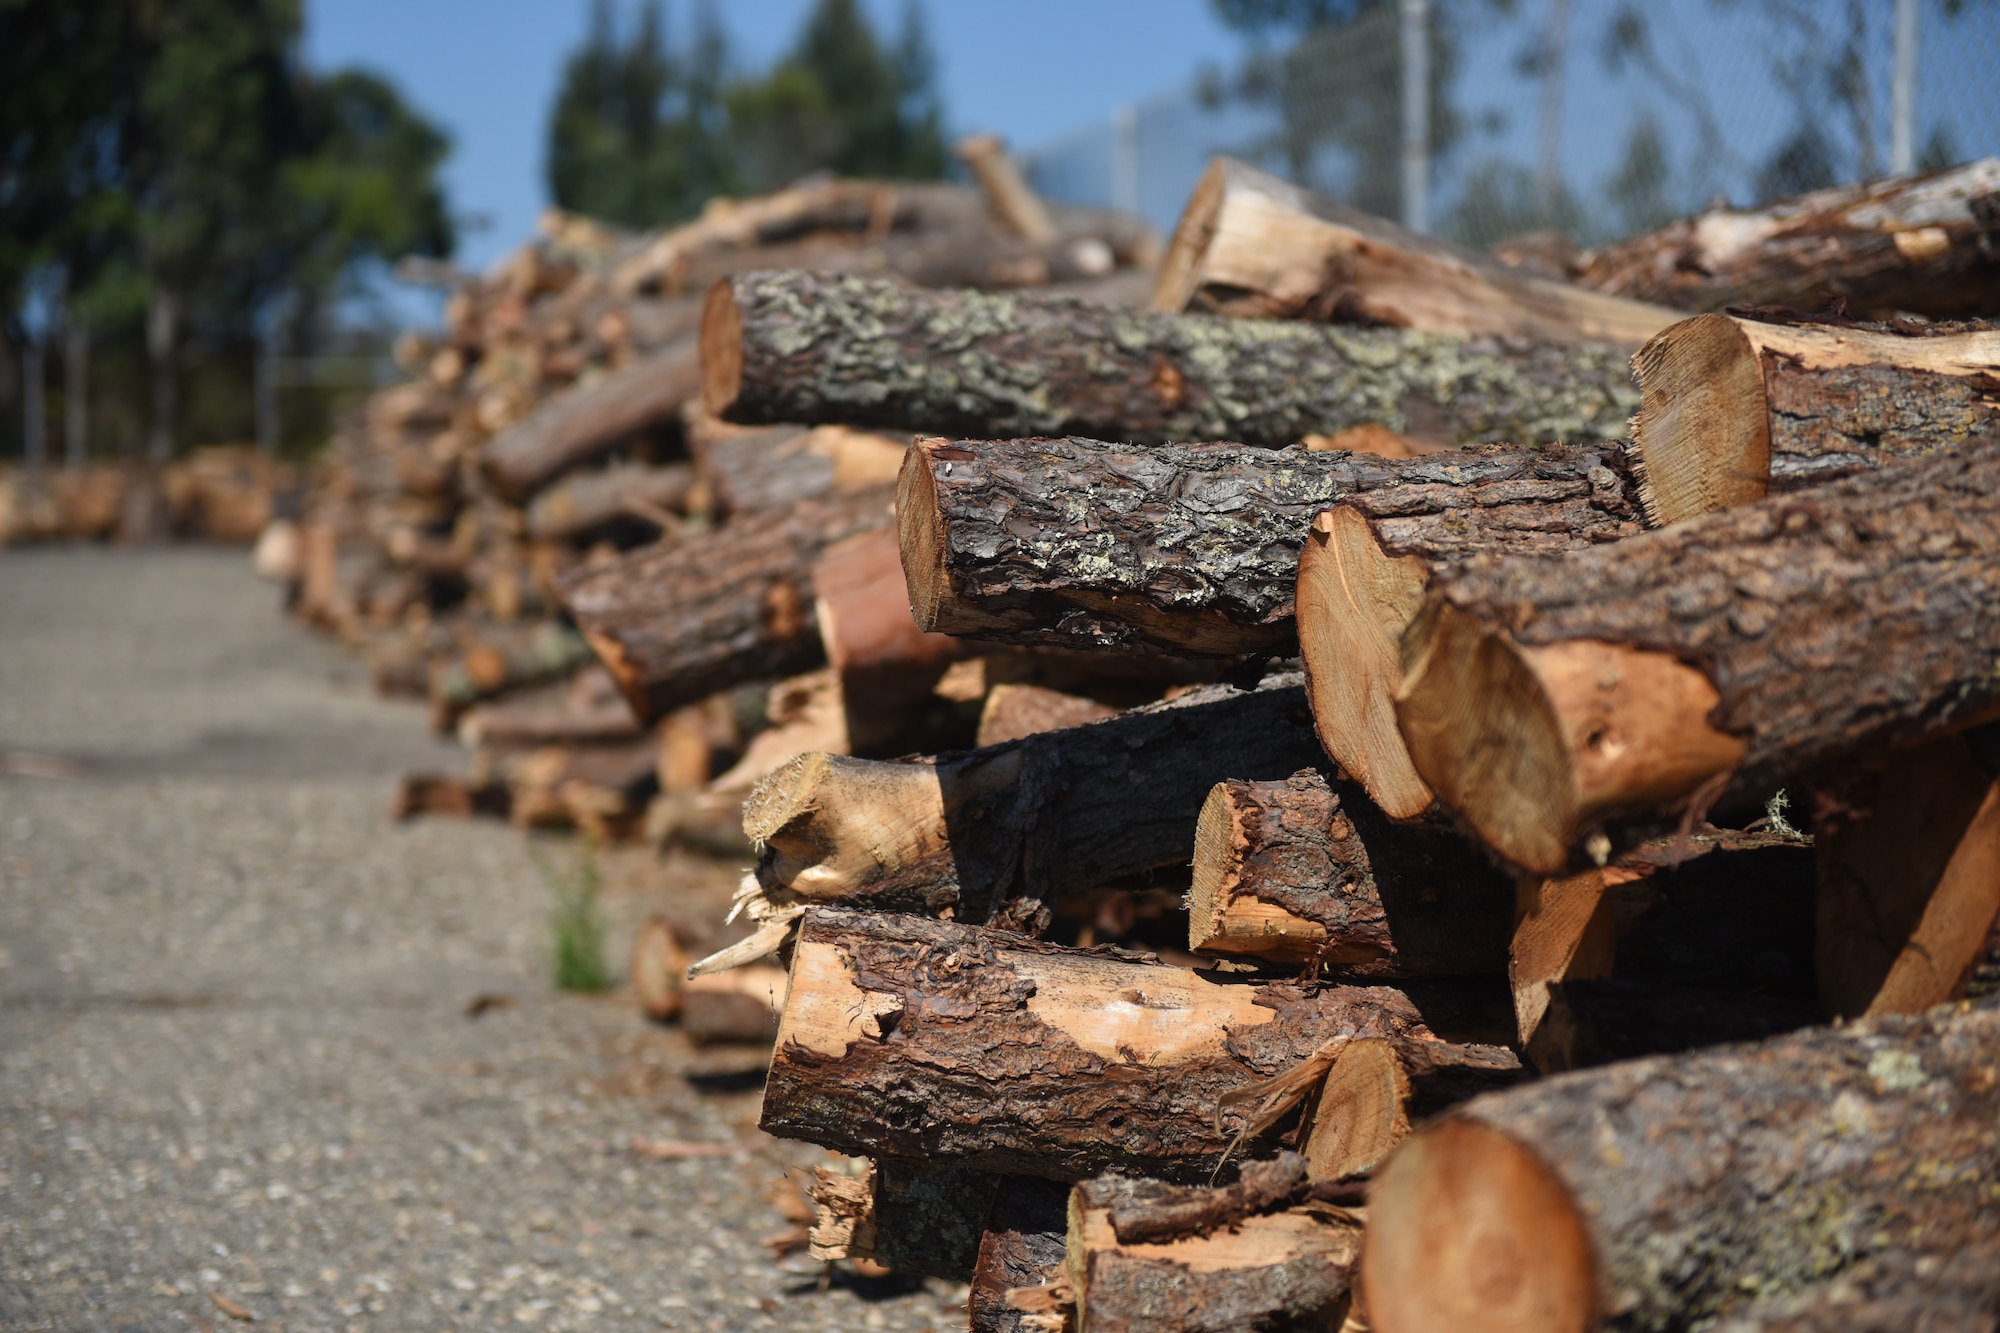 Reuseable wood scraps as well as uncut logs, rounds and tree limbs are available for free to anyone with base access. The Vandenberg Recycling Center also hosts free split firewood giveaways during select dates throughout the year.